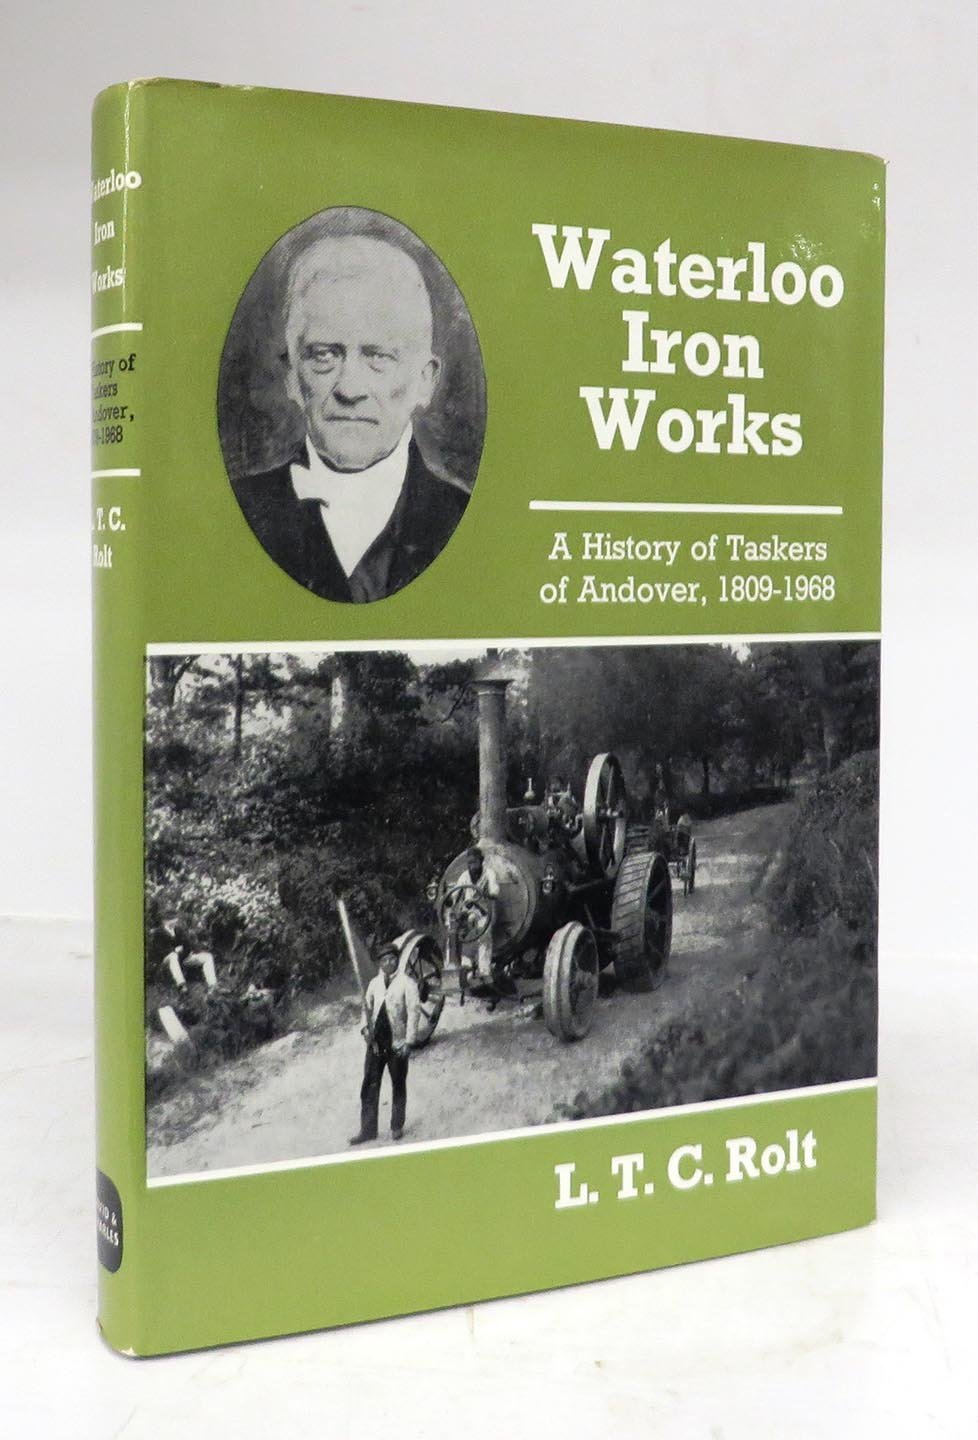 Waterloo Iron Works: A History of Taskers and Andover, 1809-1968